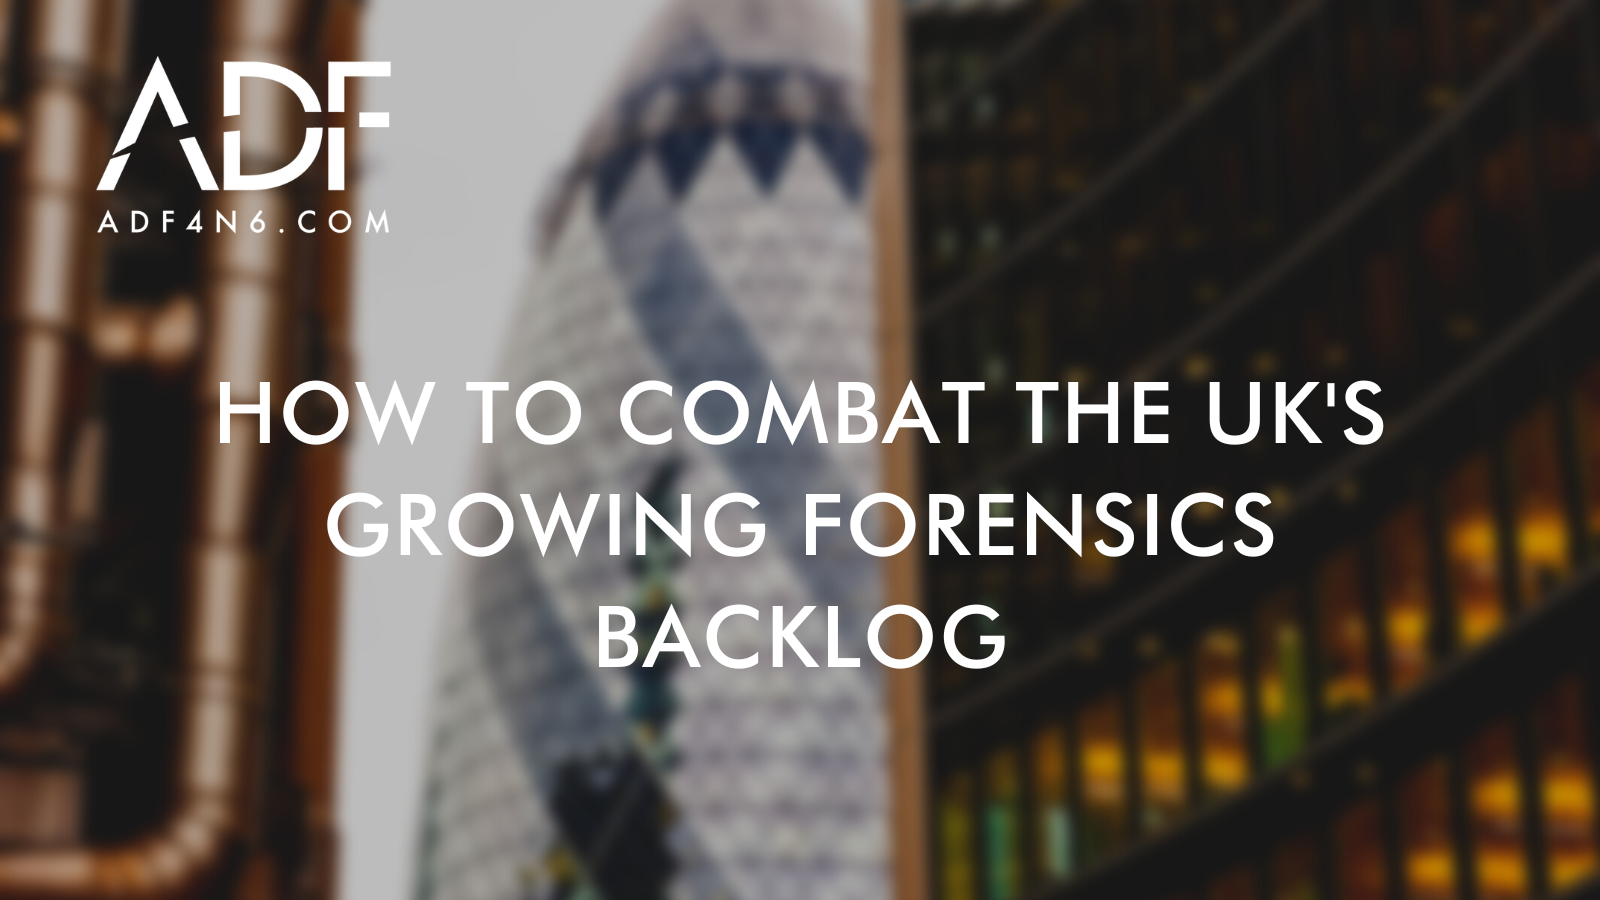 How to Combat the UK's Growing Forensics Backlog